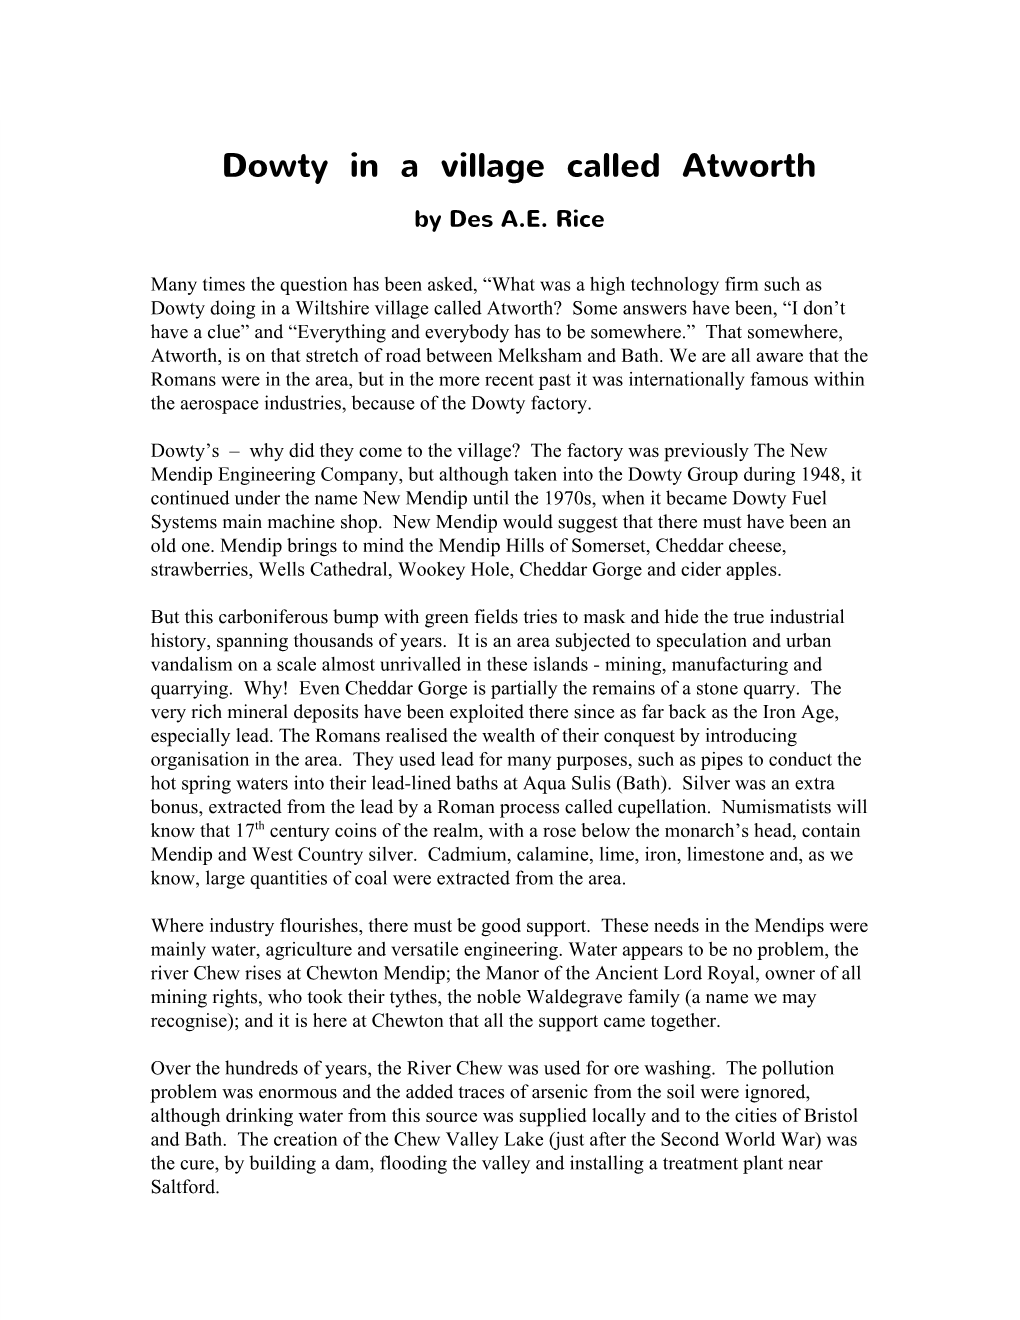 Dowty in a Village Called Atworth by Des A.E